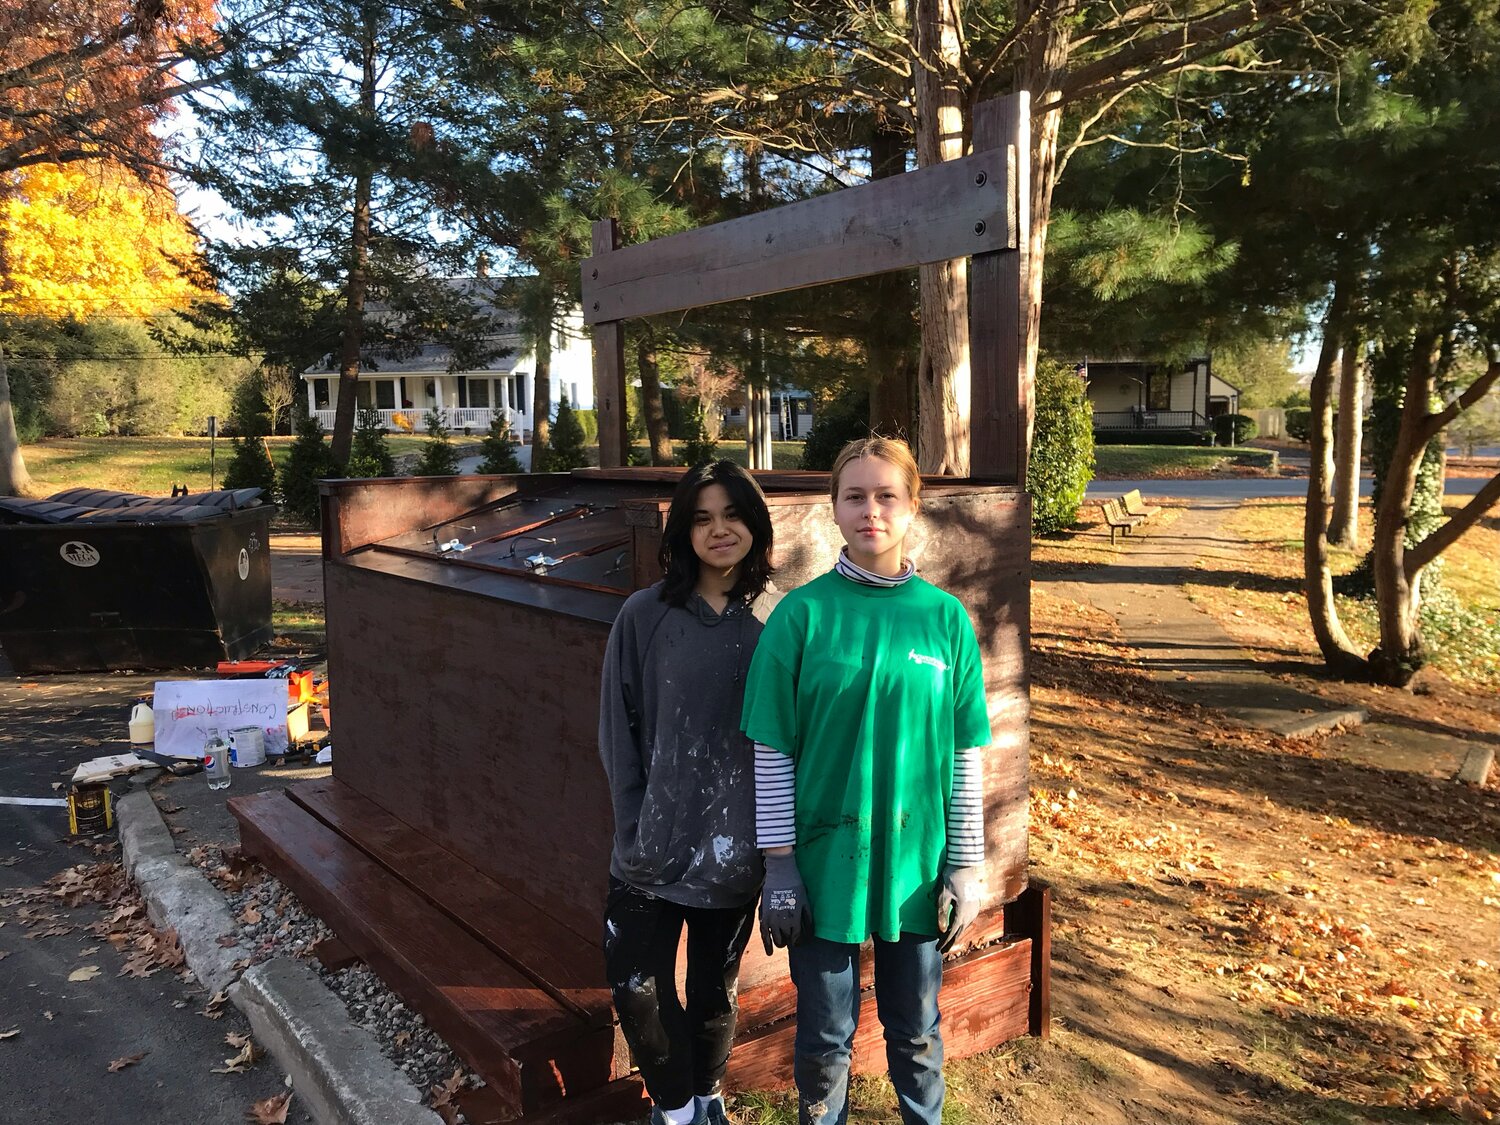 Barrington High School students Sabine Cladis (left) and Emma Pautz stand in front of the new compost drop-off site. It is located near the Barrington Senior Center parking lot.